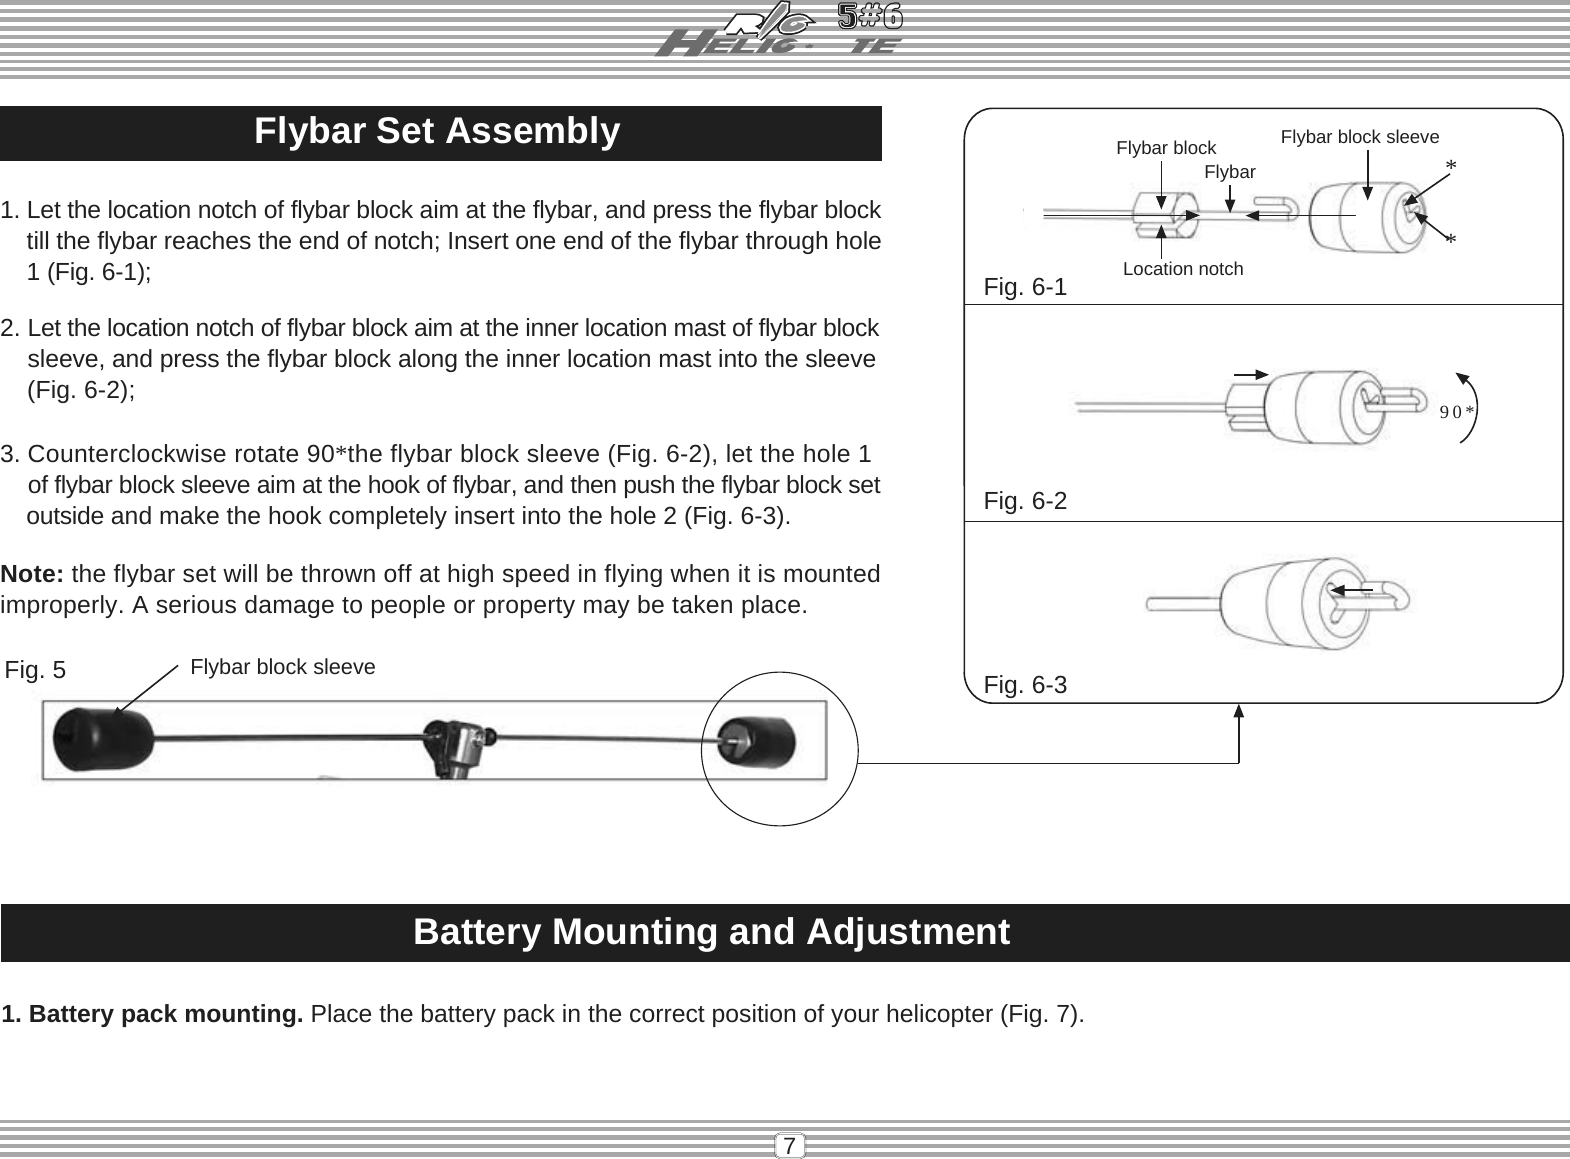 7Flybar Set Assembly1. Let the location notch of flybar block aim at the flybar, and press the flybar blocktill the flybar reaches the end of notch; Insert one end of the flybar through hole    1 (Fig. 6-1);2. Let the location notch of flybar block aim at the inner location mast of flybar blocksleeve, and press the flybar block along the inner location mast into the sleeve(Fig. 6-2);3. Counterclockwise rotate 90*the flybar block sleeve (Fig. 6-2), let the hole 1of flybar block sleeve aim at the hook of flybar, and then push the flybar block set    outside and make the hook completely insert into the hole 2 (Fig. 6-3).Note: the flybar set will be thrown off at high speed in flying when it is mountedimproperly. A serious damage to people or property may be taken place.Fig. 6-1Fig. 6-2Fig. 6-390* Flybar blockLocation notchFlybar block sleeve**FlybarFlybar block sleeveFig. 5Battery Mounting and Adjustment1. Battery pack mounting. Place the battery pack in the correct position of your helicopter (Fig. 7).